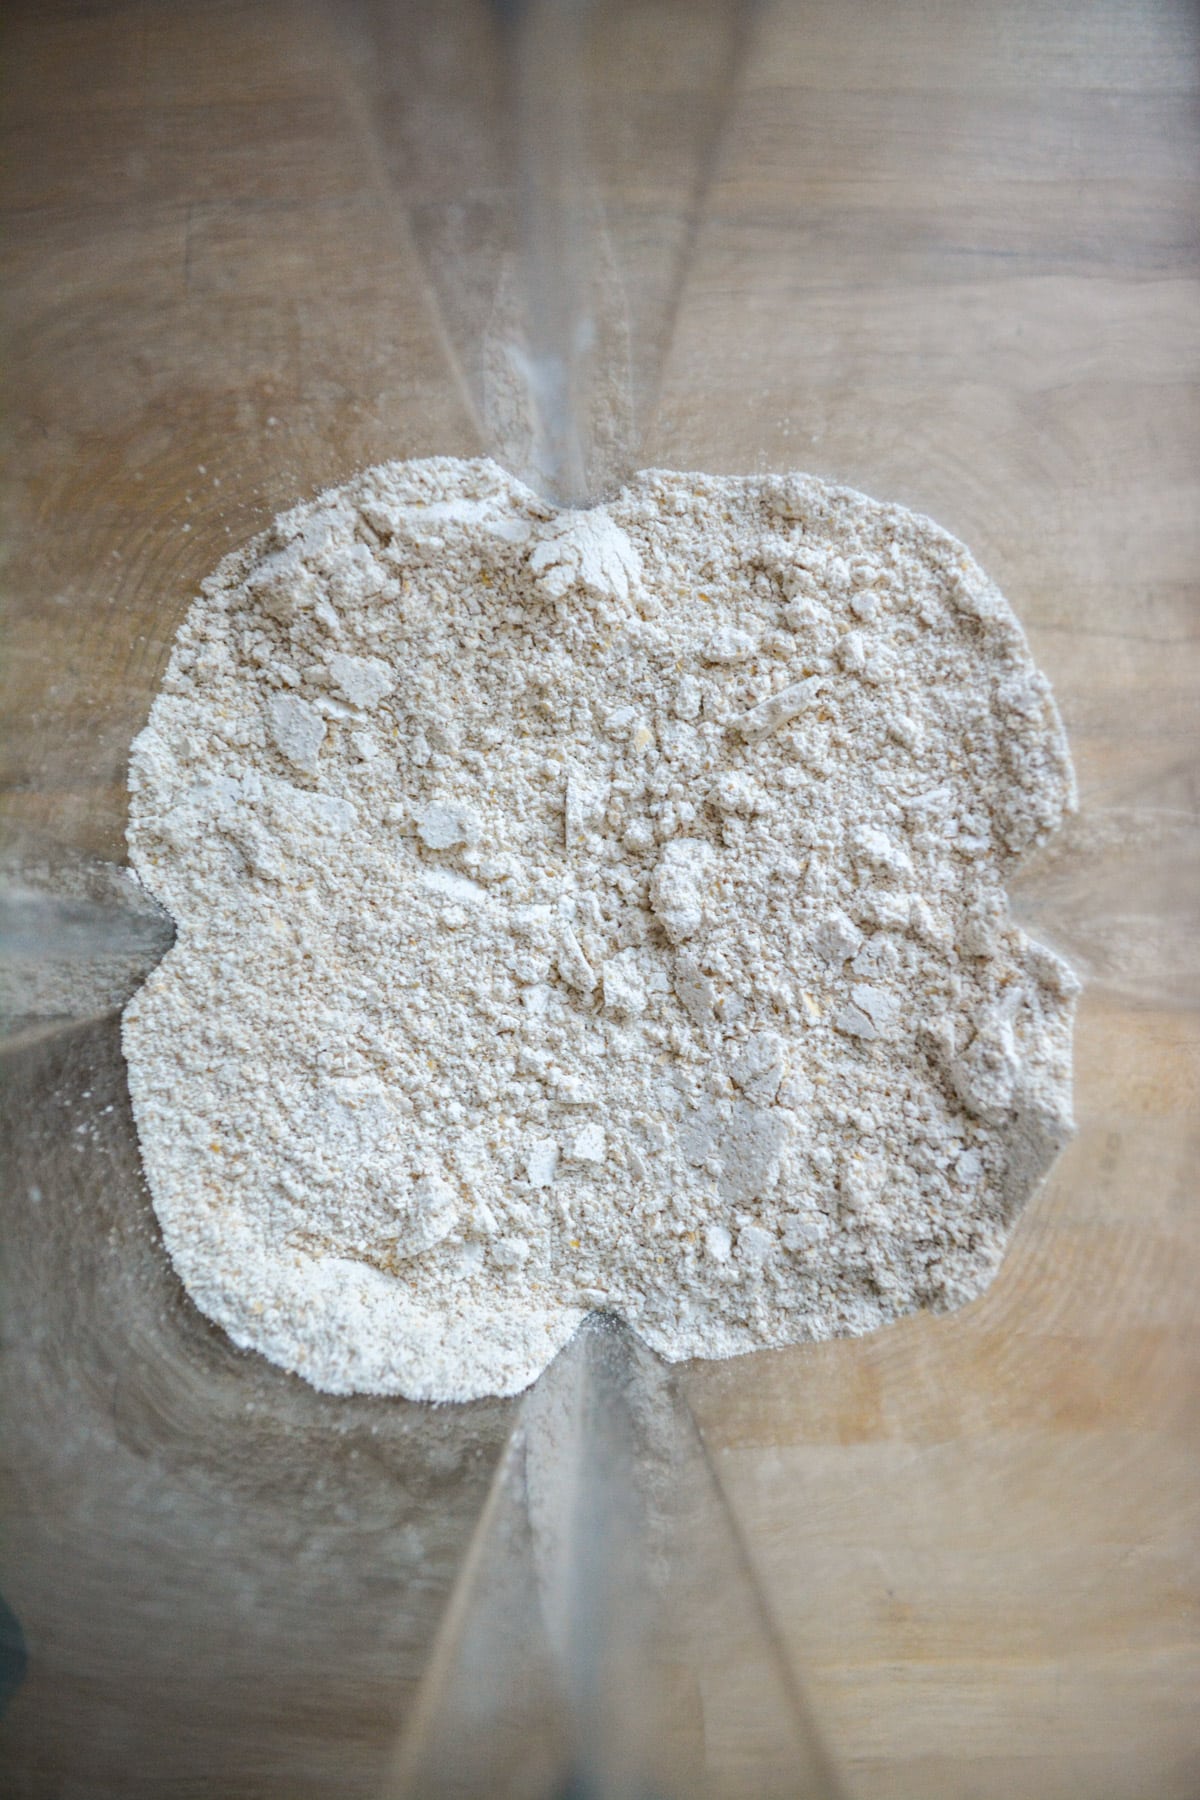 Homemade oat flour in the pitcher of a blender.